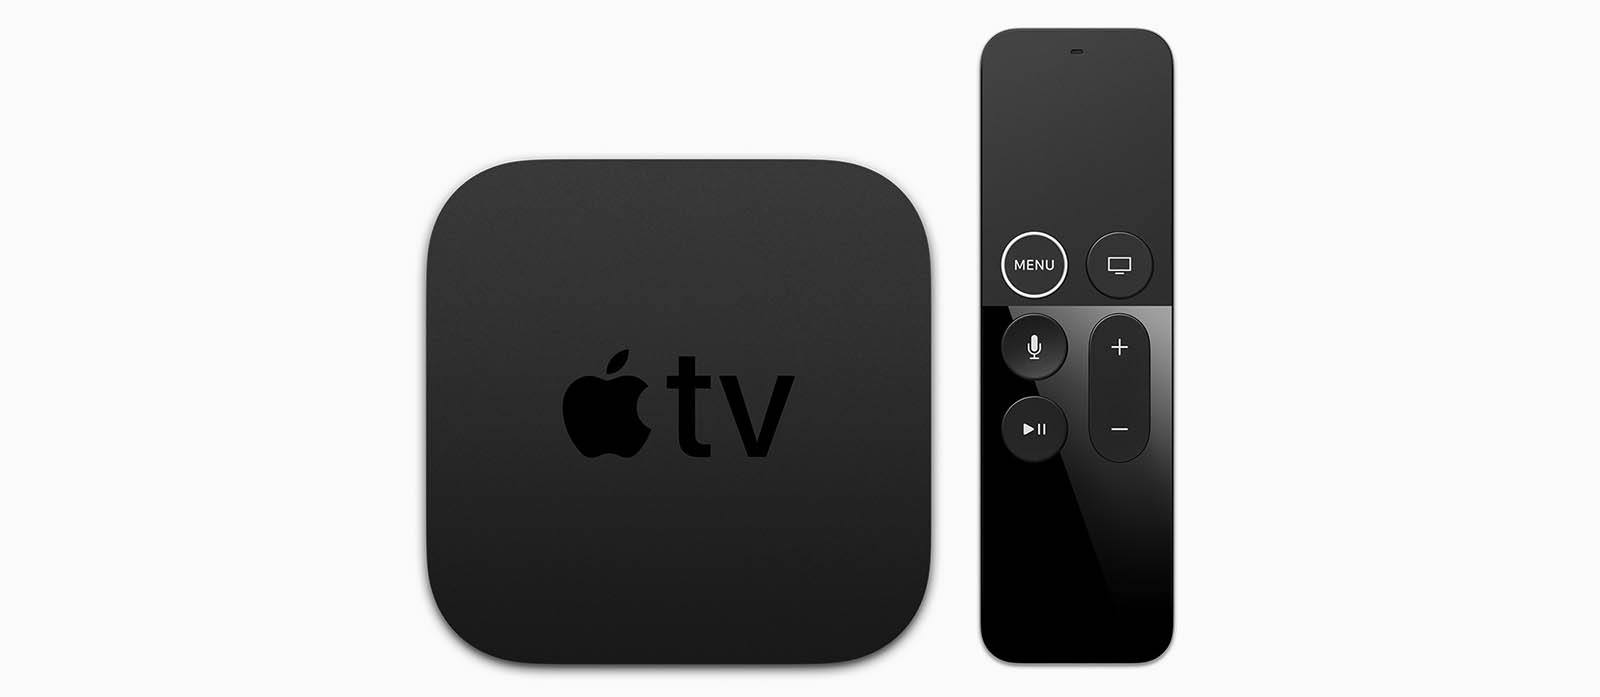 Here’s What I’d Like To See in a Next-Gen Apple TV